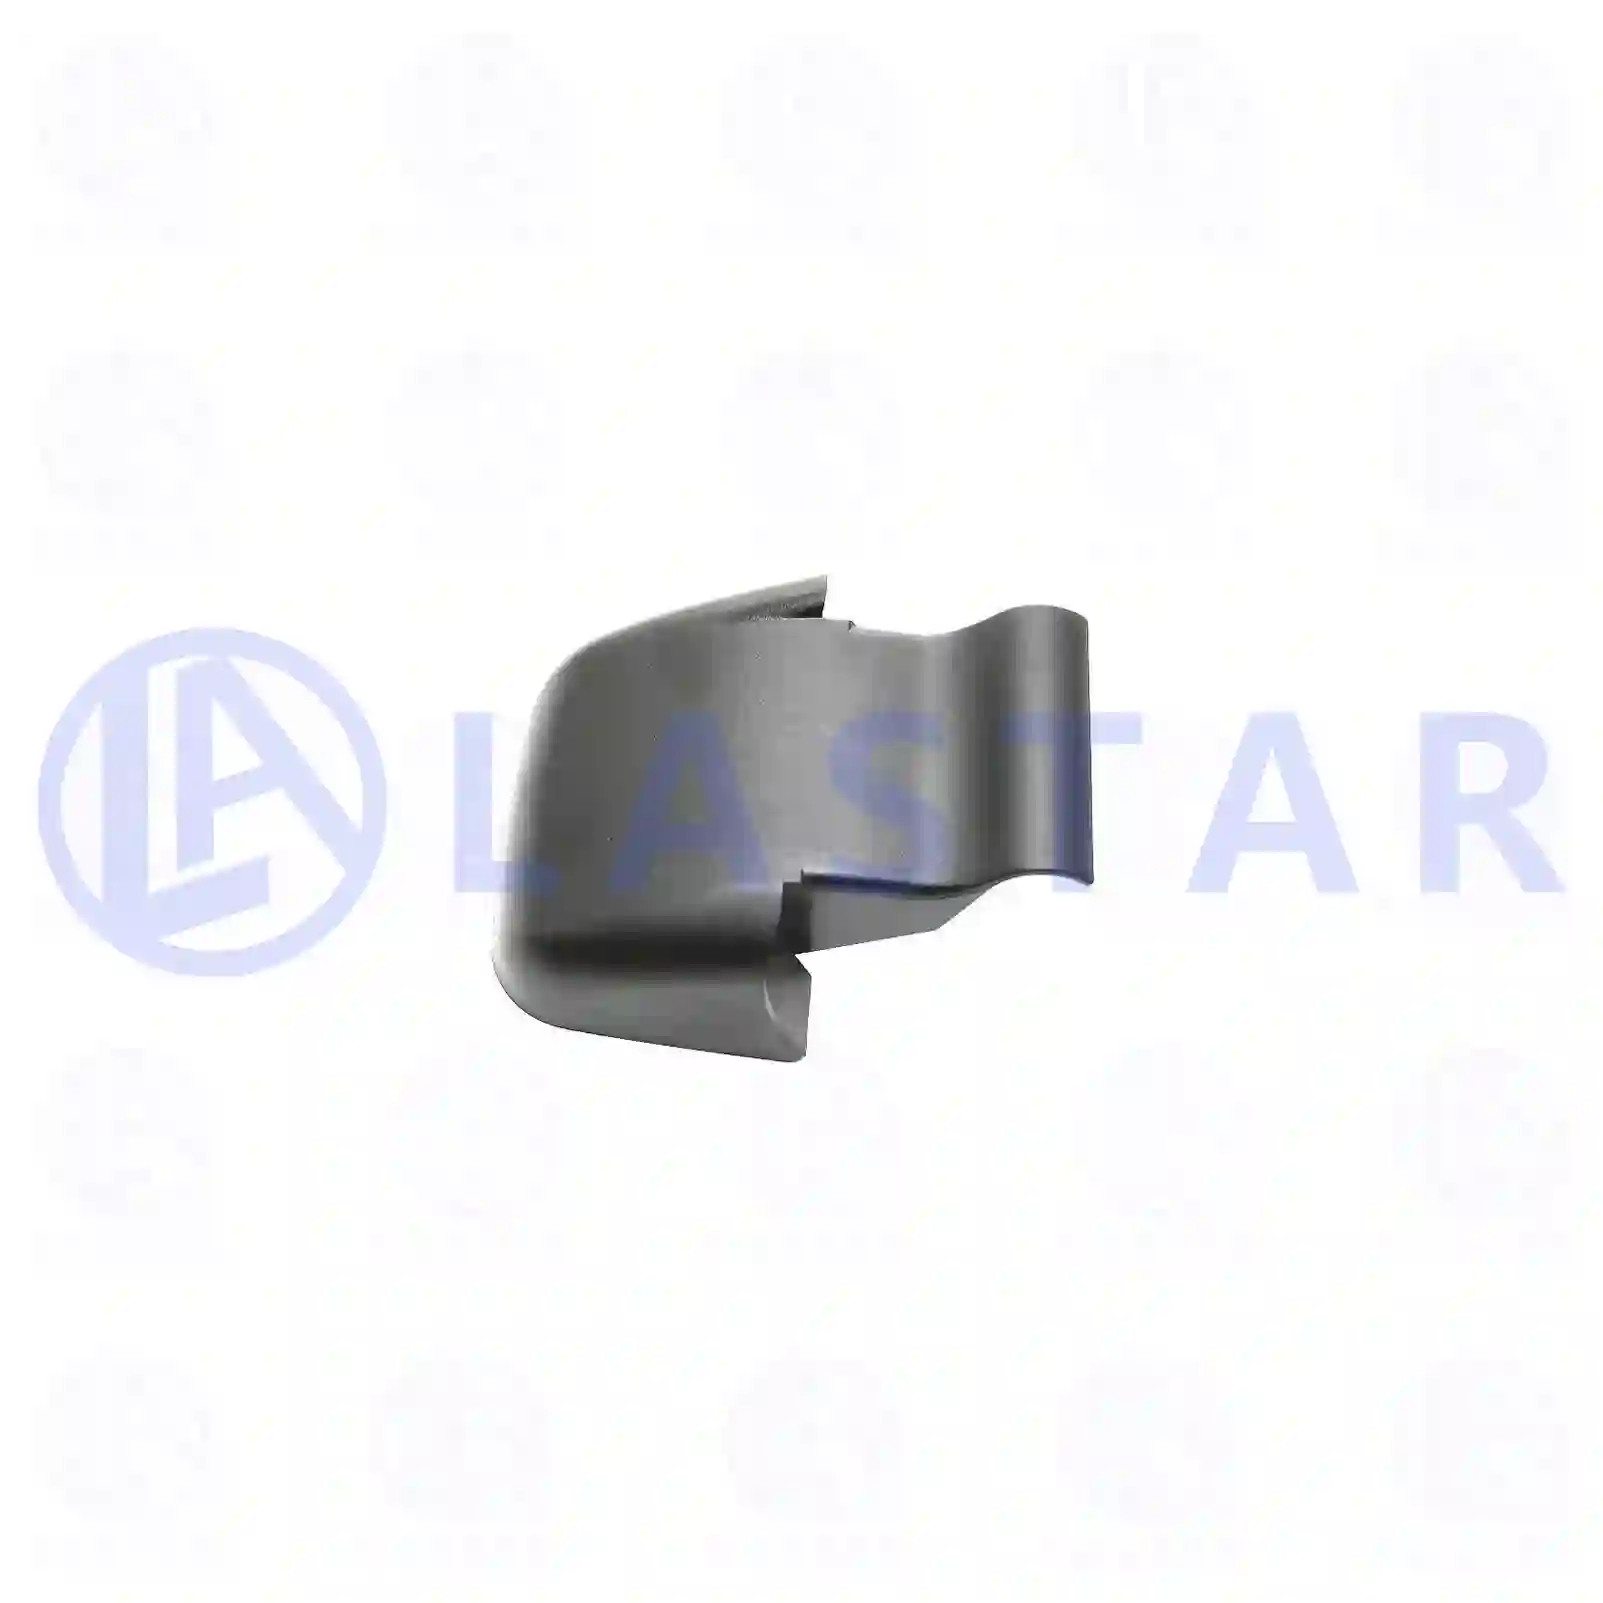 Cover, left, 77721505, 1346939, ZG60460-0008 ||  77721505 Lastar Spare Part | Truck Spare Parts, Auotomotive Spare Parts Cover, left, 77721505, 1346939, ZG60460-0008 ||  77721505 Lastar Spare Part | Truck Spare Parts, Auotomotive Spare Parts